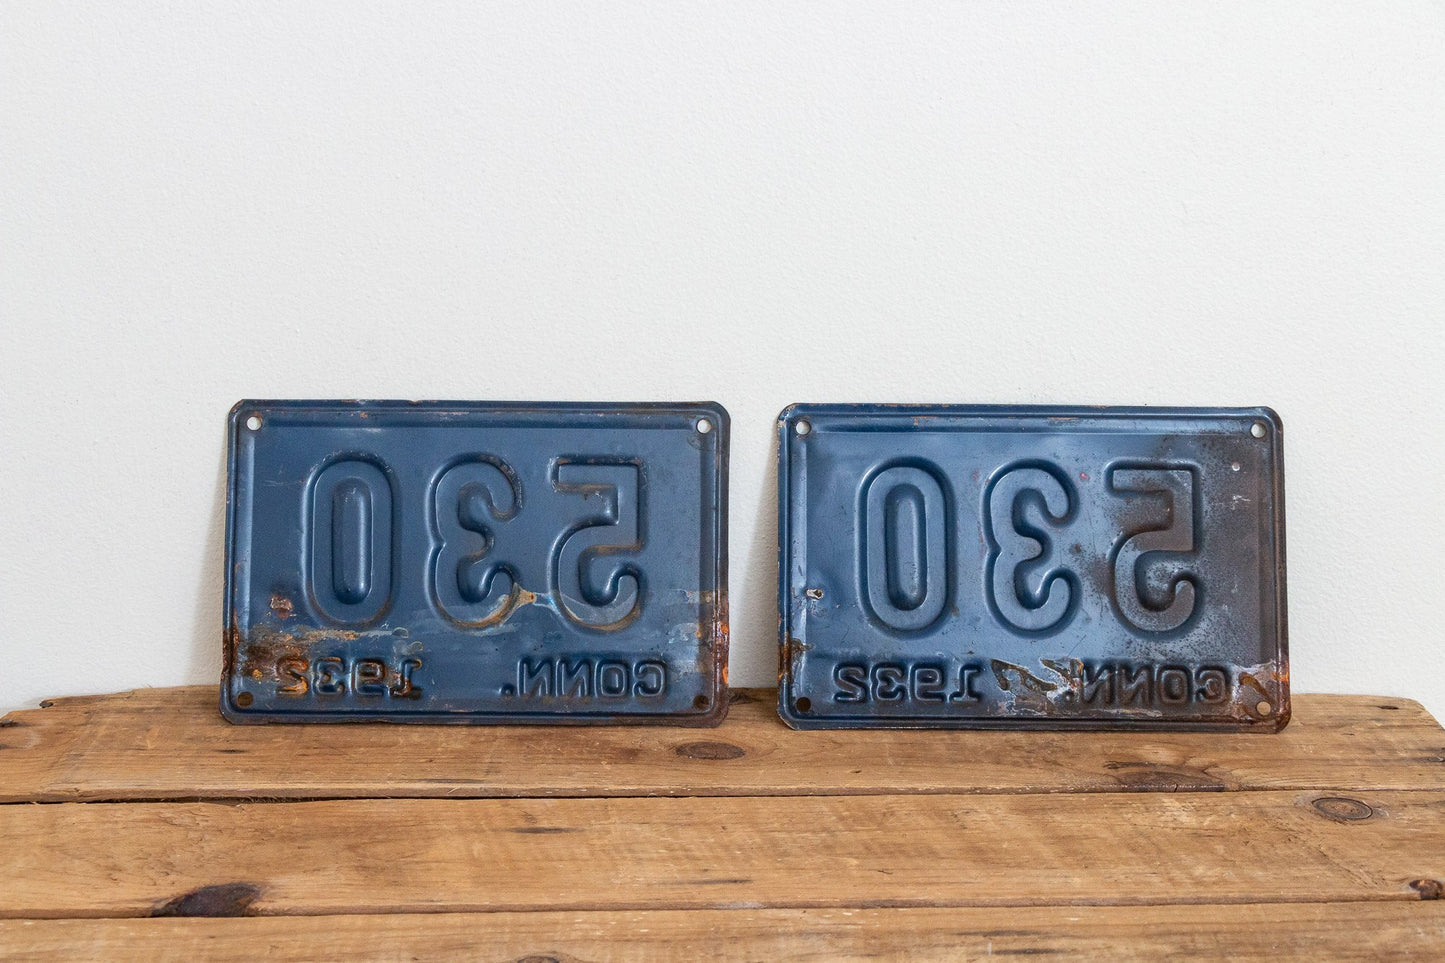 530 Connecticut 1932 License Plate Pair 3 Digit Low Number Vintage Wall Decor - Eagle's Eye Finds